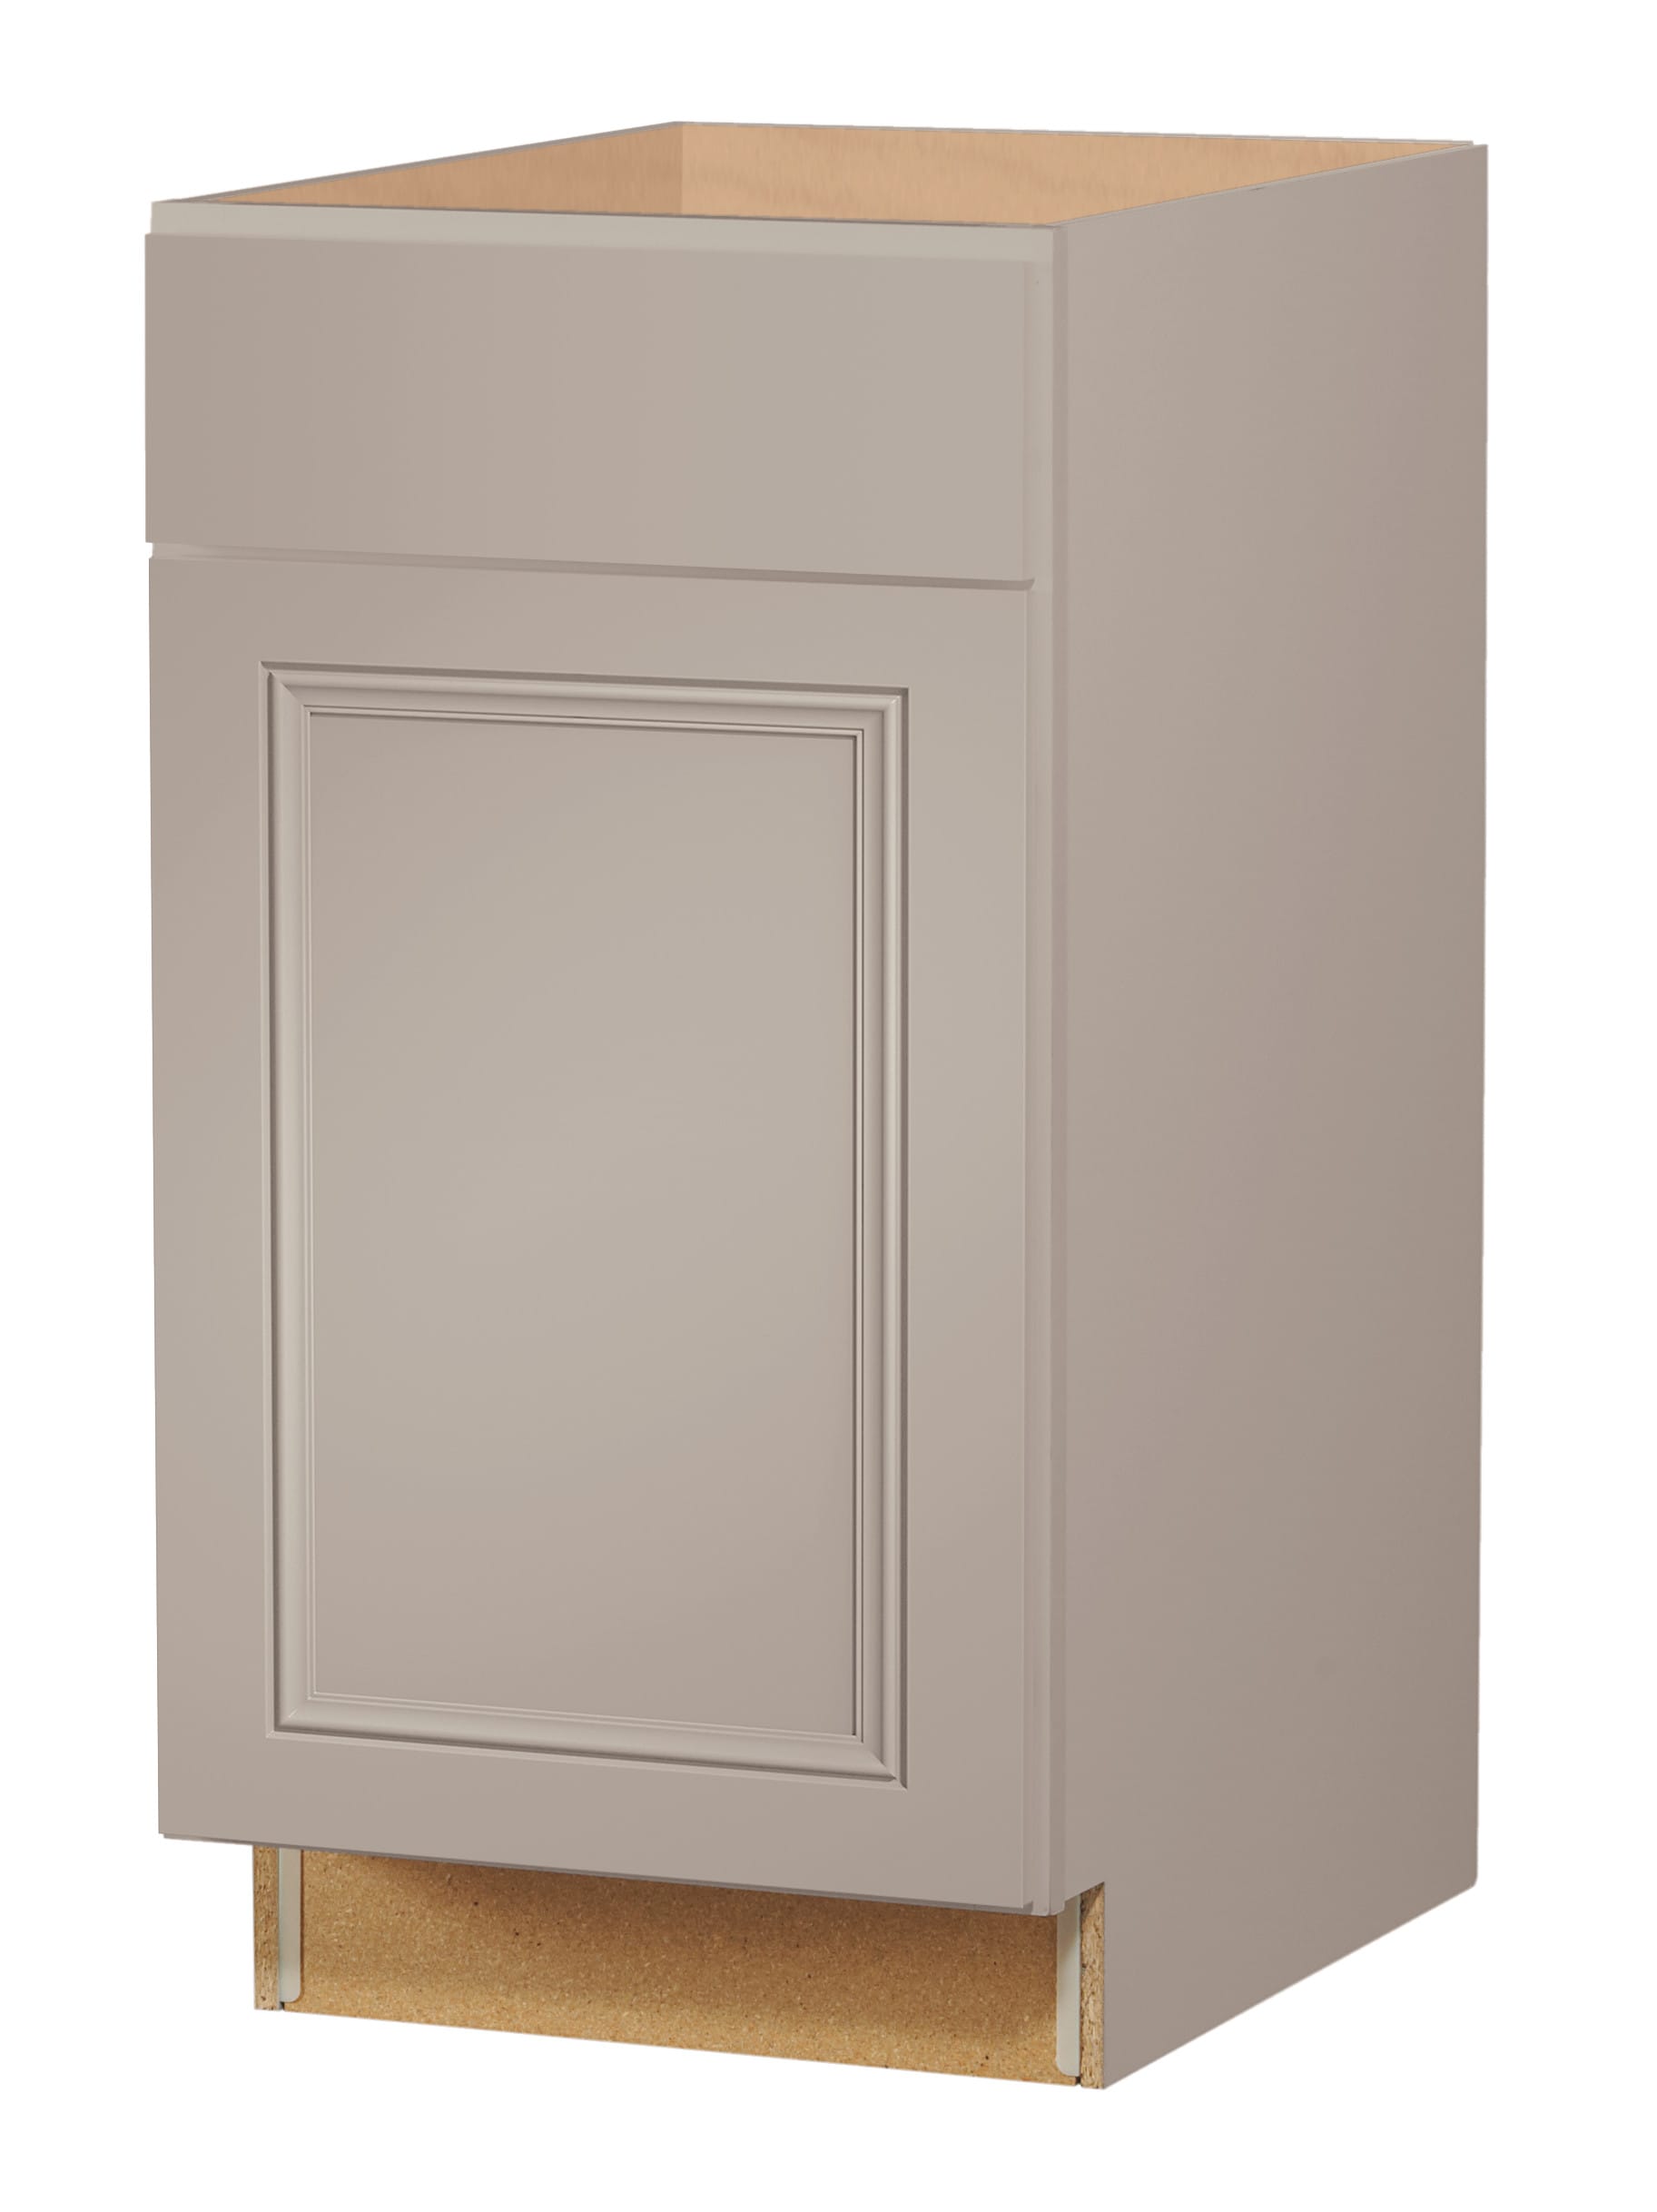 KCD-LV-DWR1560-PA - KCD - Lenox Canvas - 15 x 60 x 15 Wall Tower w/ 3  Drawers - Preassembled - Discount Custom Cabinets